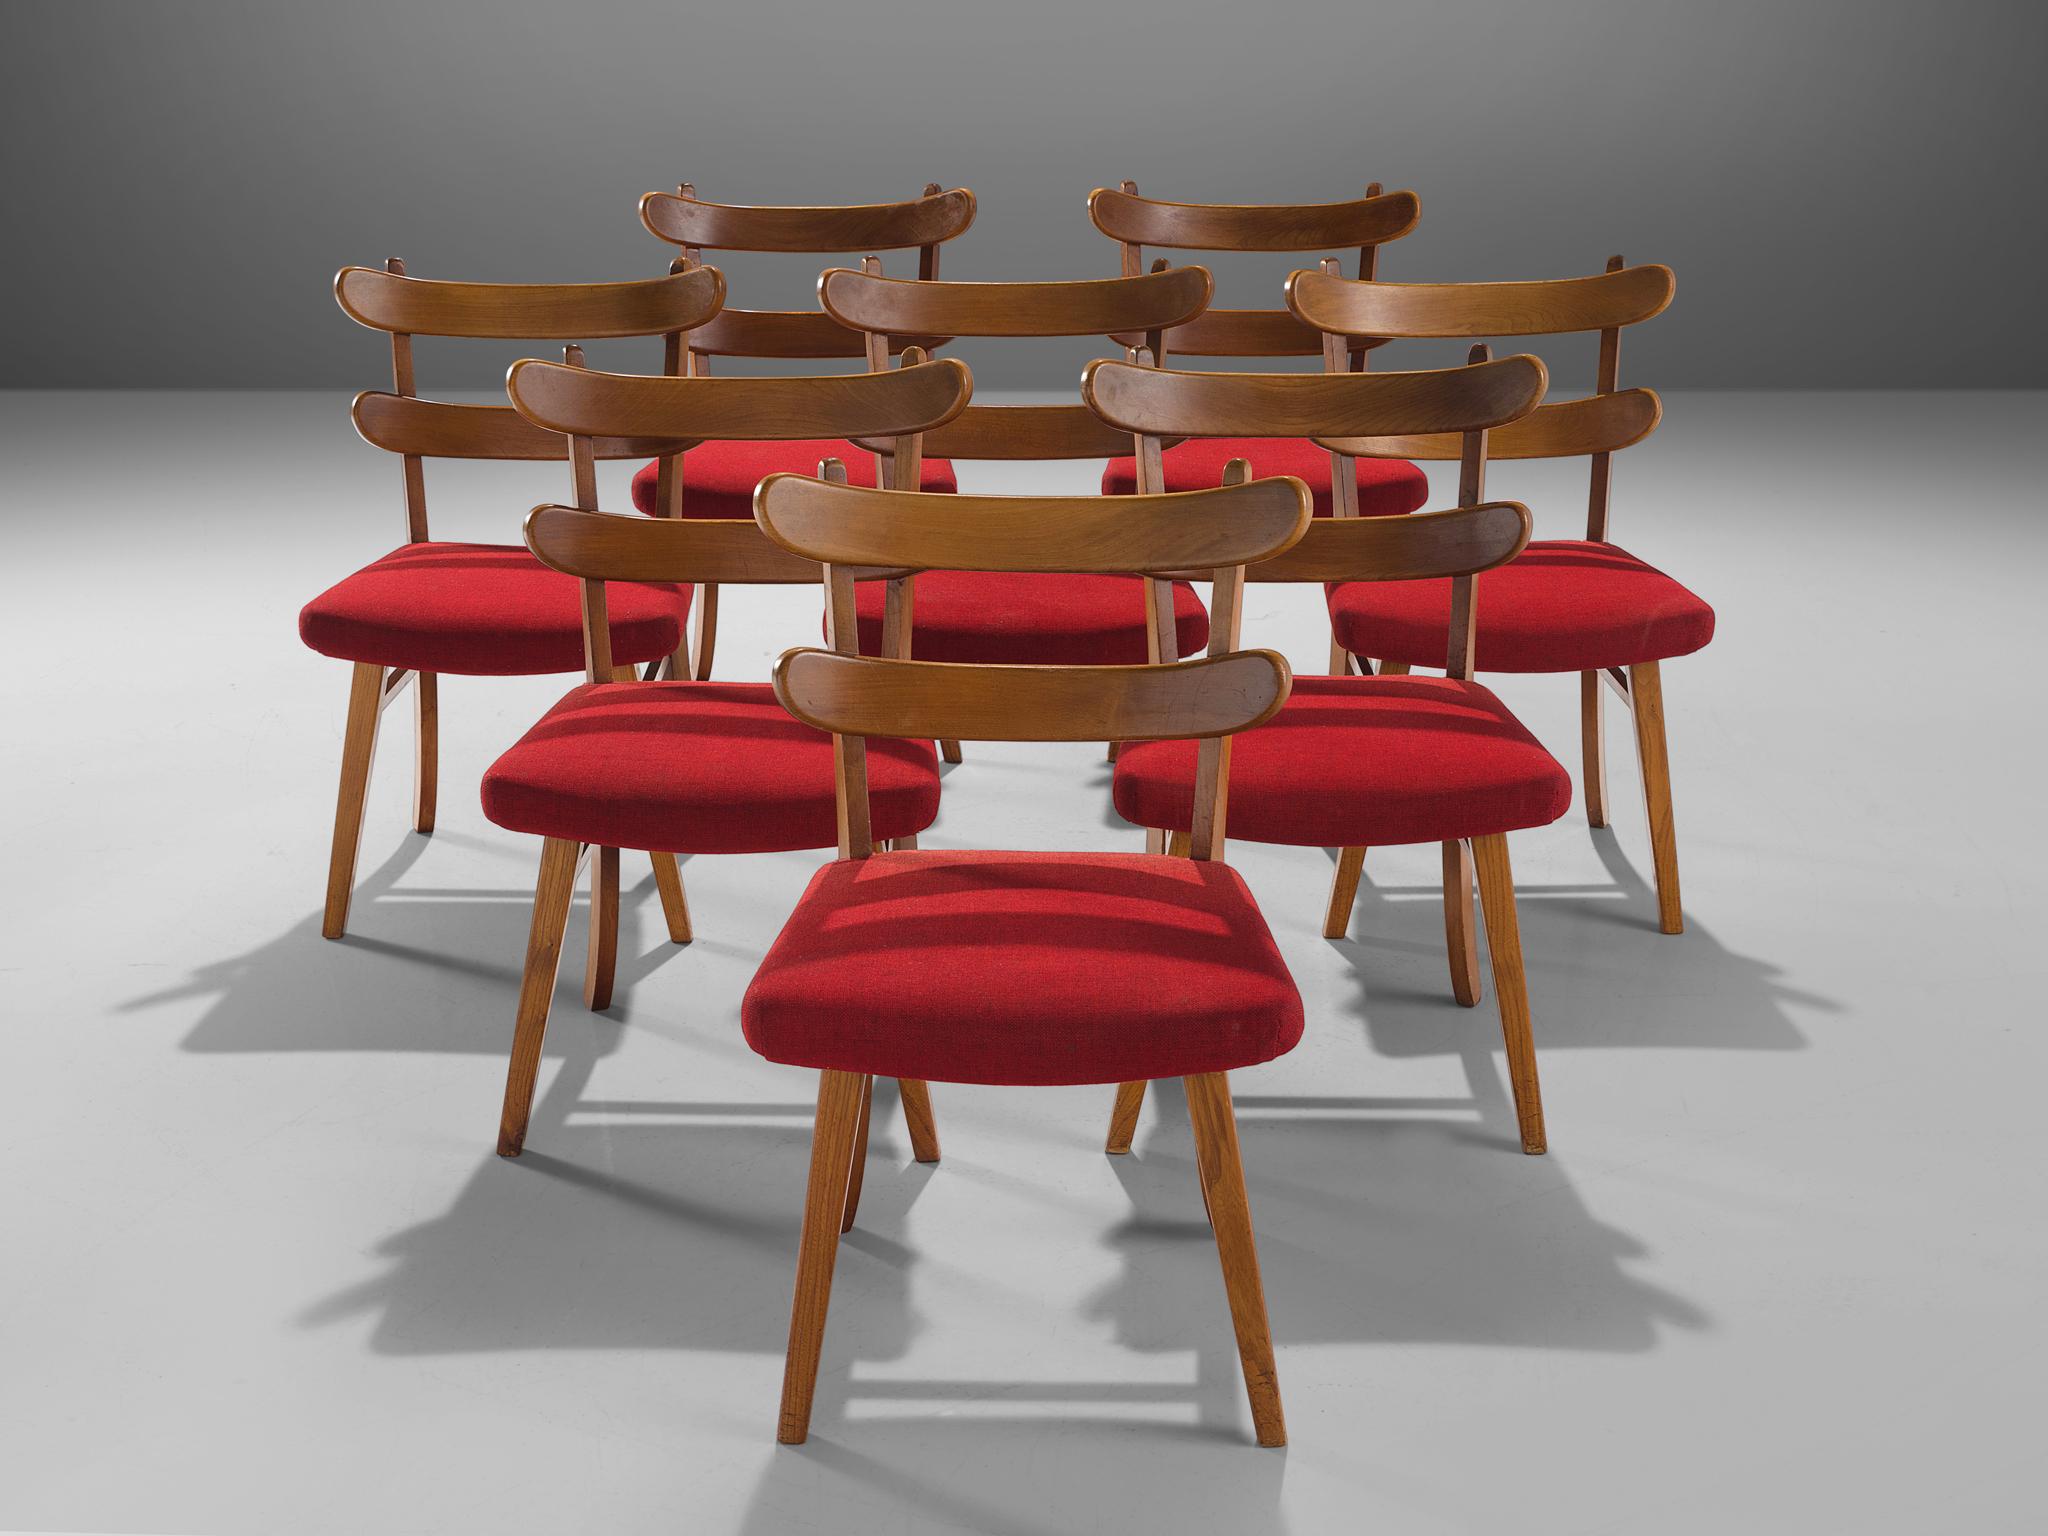 Set of eight dining chairs, elm, wool, Denmark, 1960s 

This set of eight dining chairs in elm features an upholstered red seat in wool. One distinctive trait of this Danish set are the thick curved elm slats that make the back of this chair. The